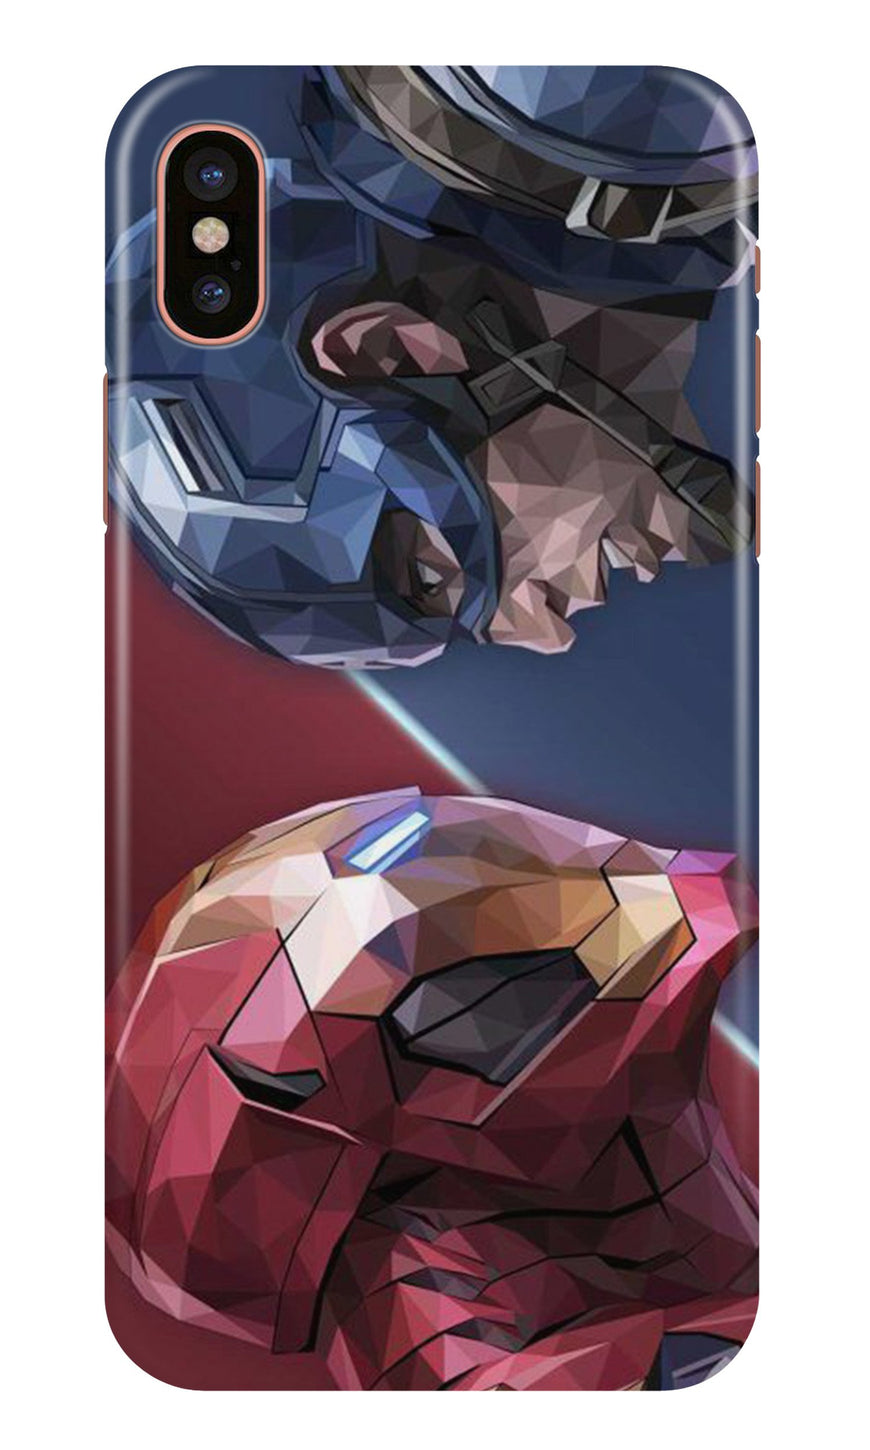 Ironman Captain America Case for iPhone Xr (Design No. 245)